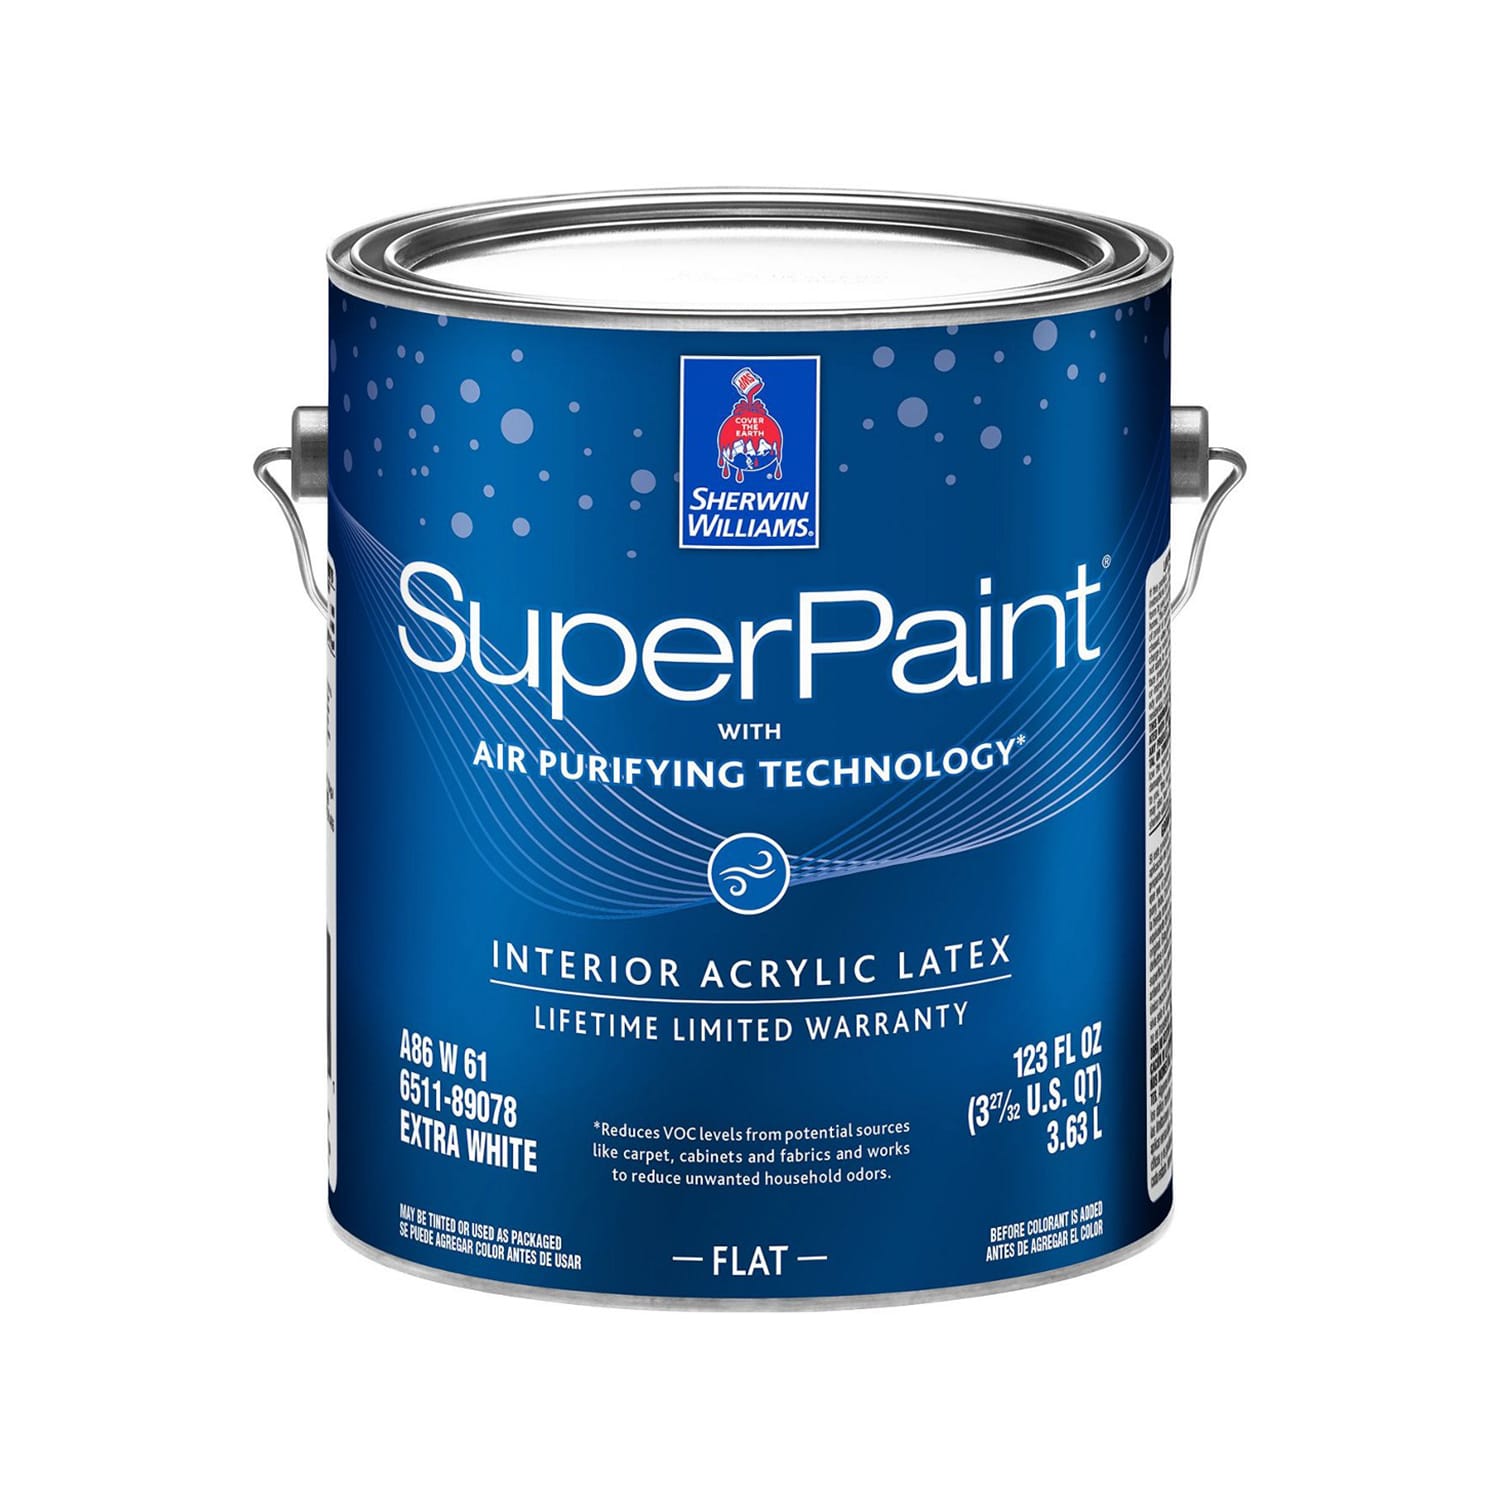 How To Find Non-Toxic Paint That Is Non-VOC